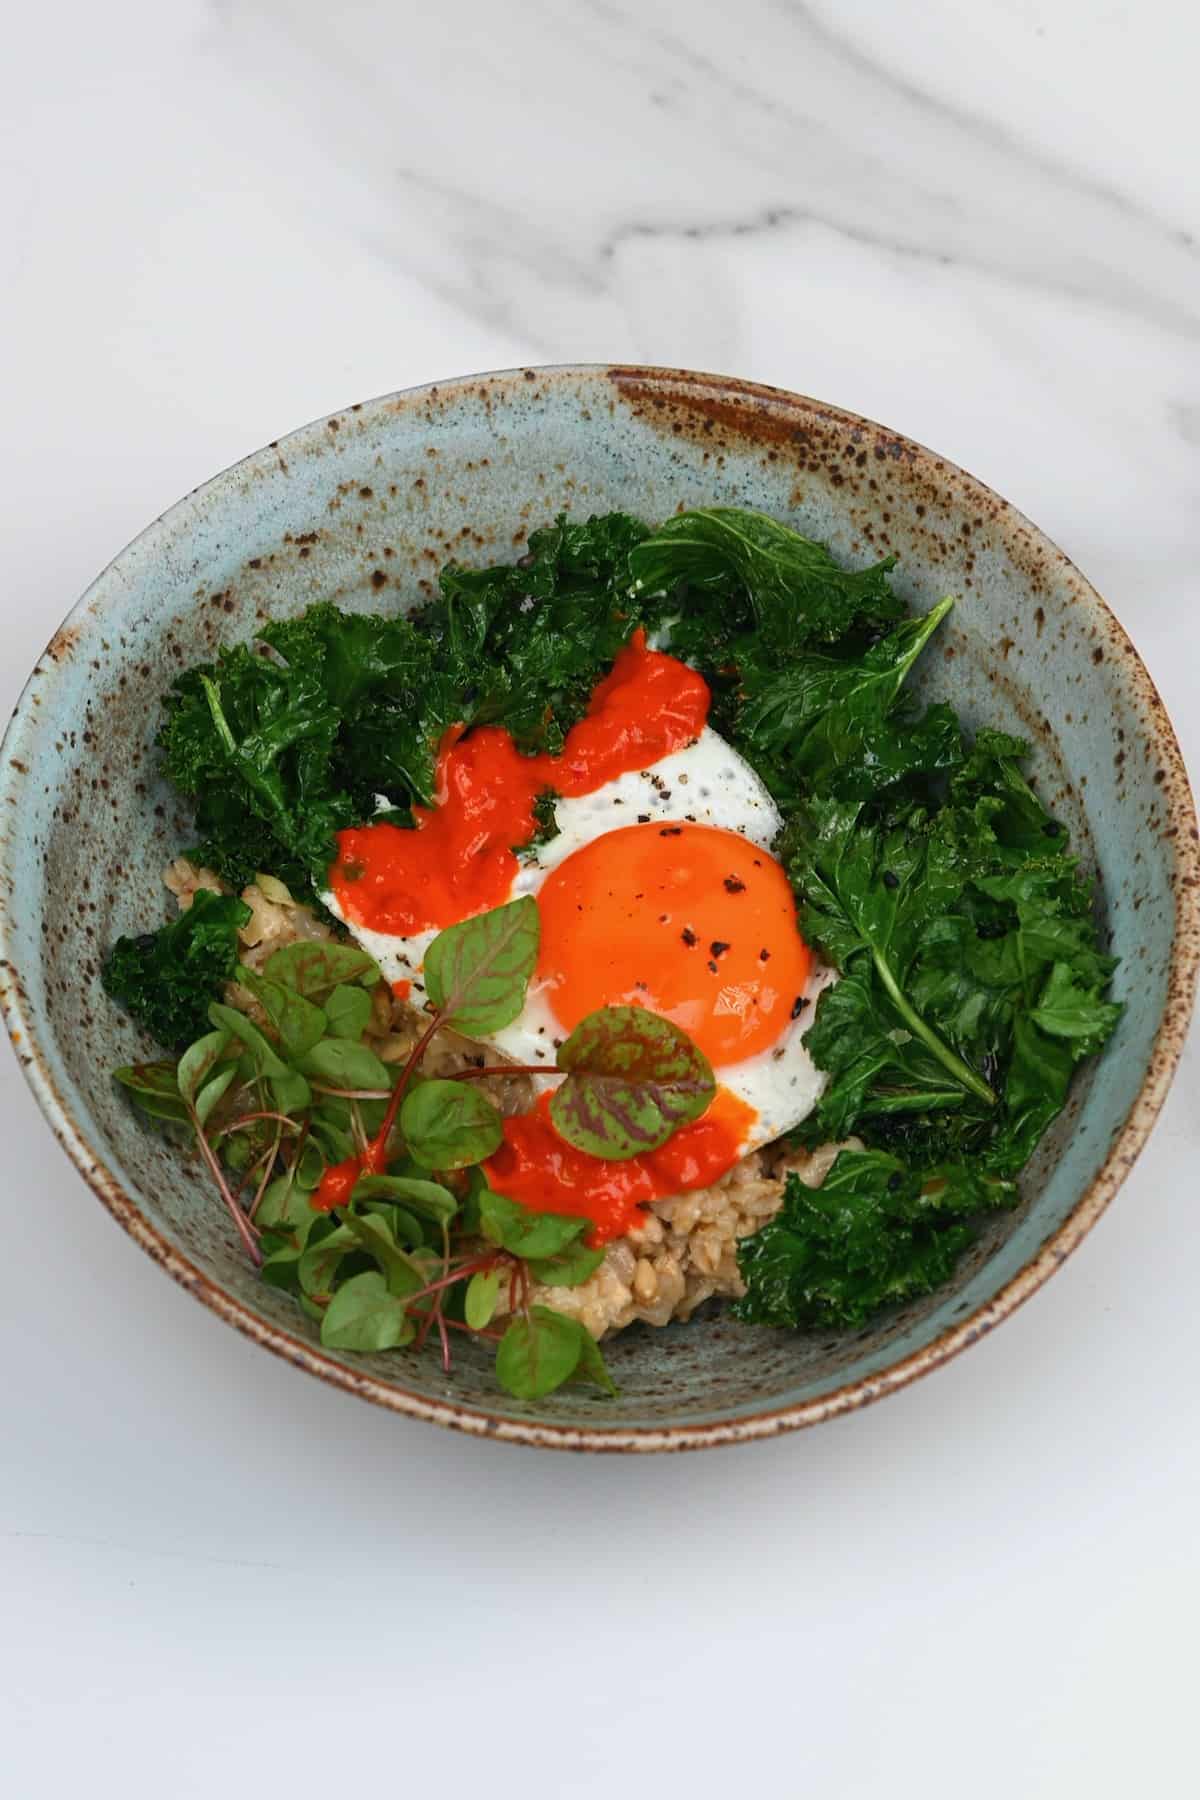 Oatmeal egg and kale in a bowl